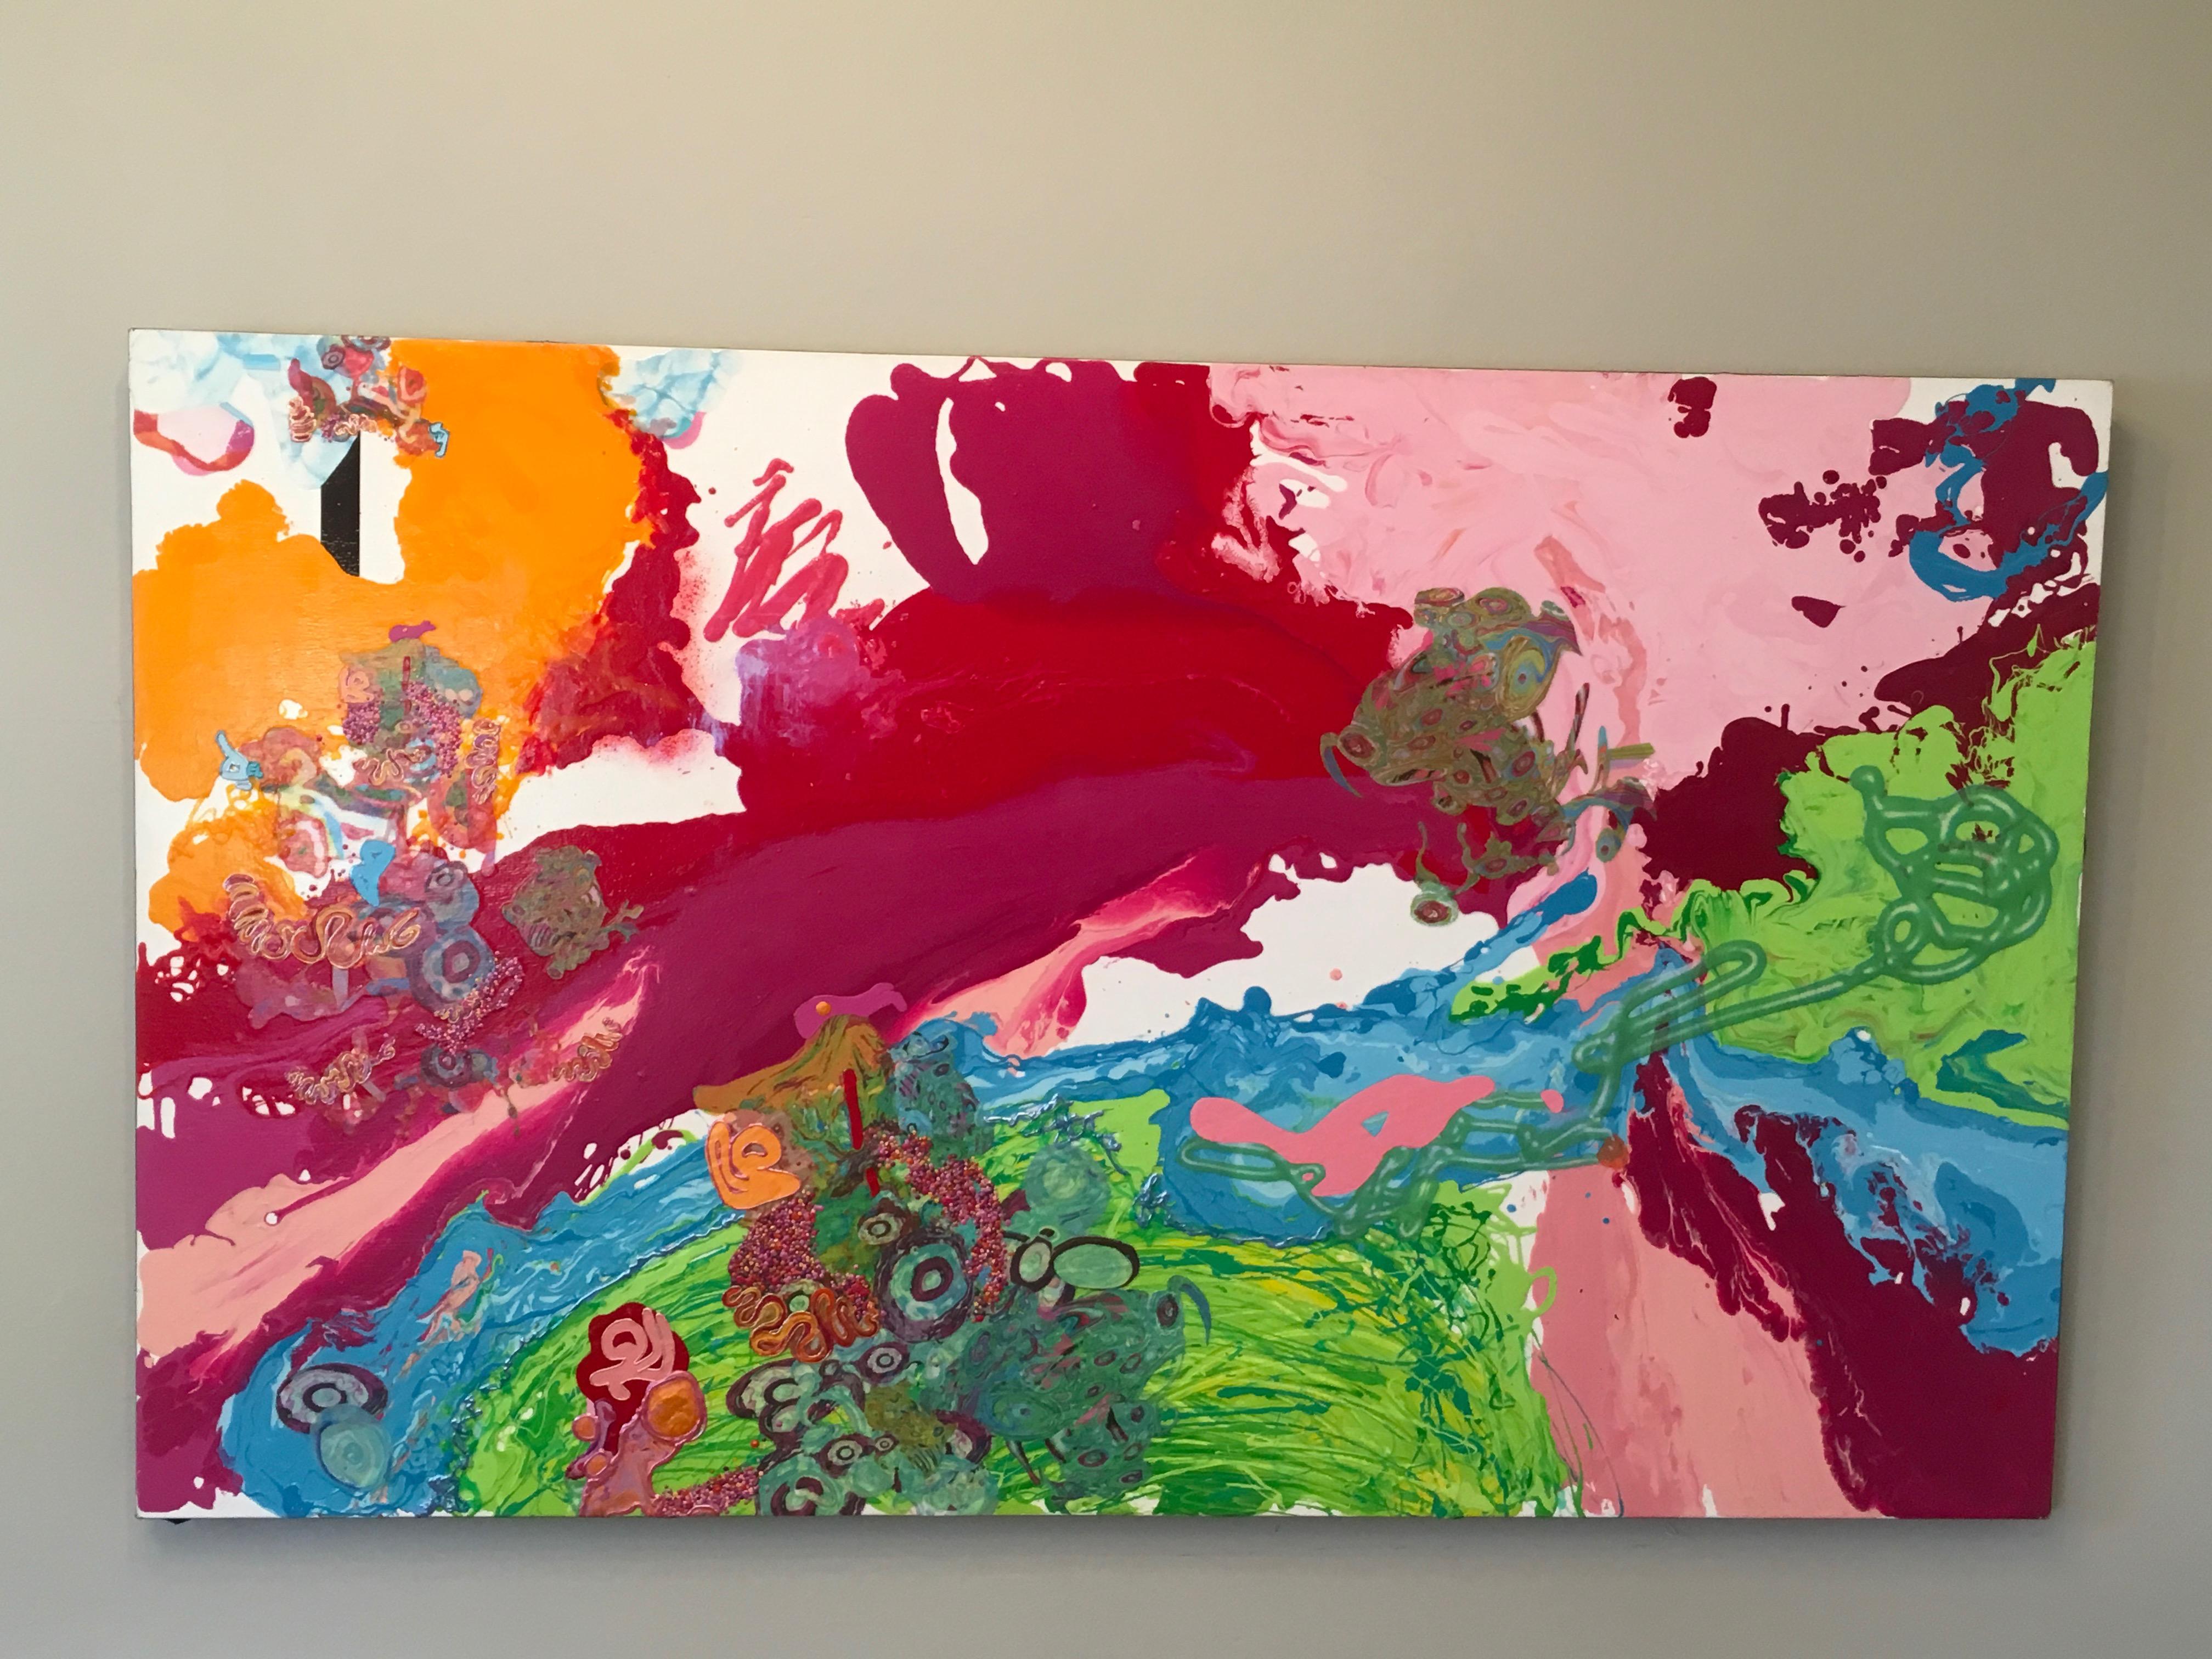 Kimber Berry, Liquid Landscape 092708,  Acrylic and Mixed Media on Canvas, 36x60.  This is a layered, dimensional contemporary painting.  It is filled with pinks, white and vibrant colors.  Berry is a California 